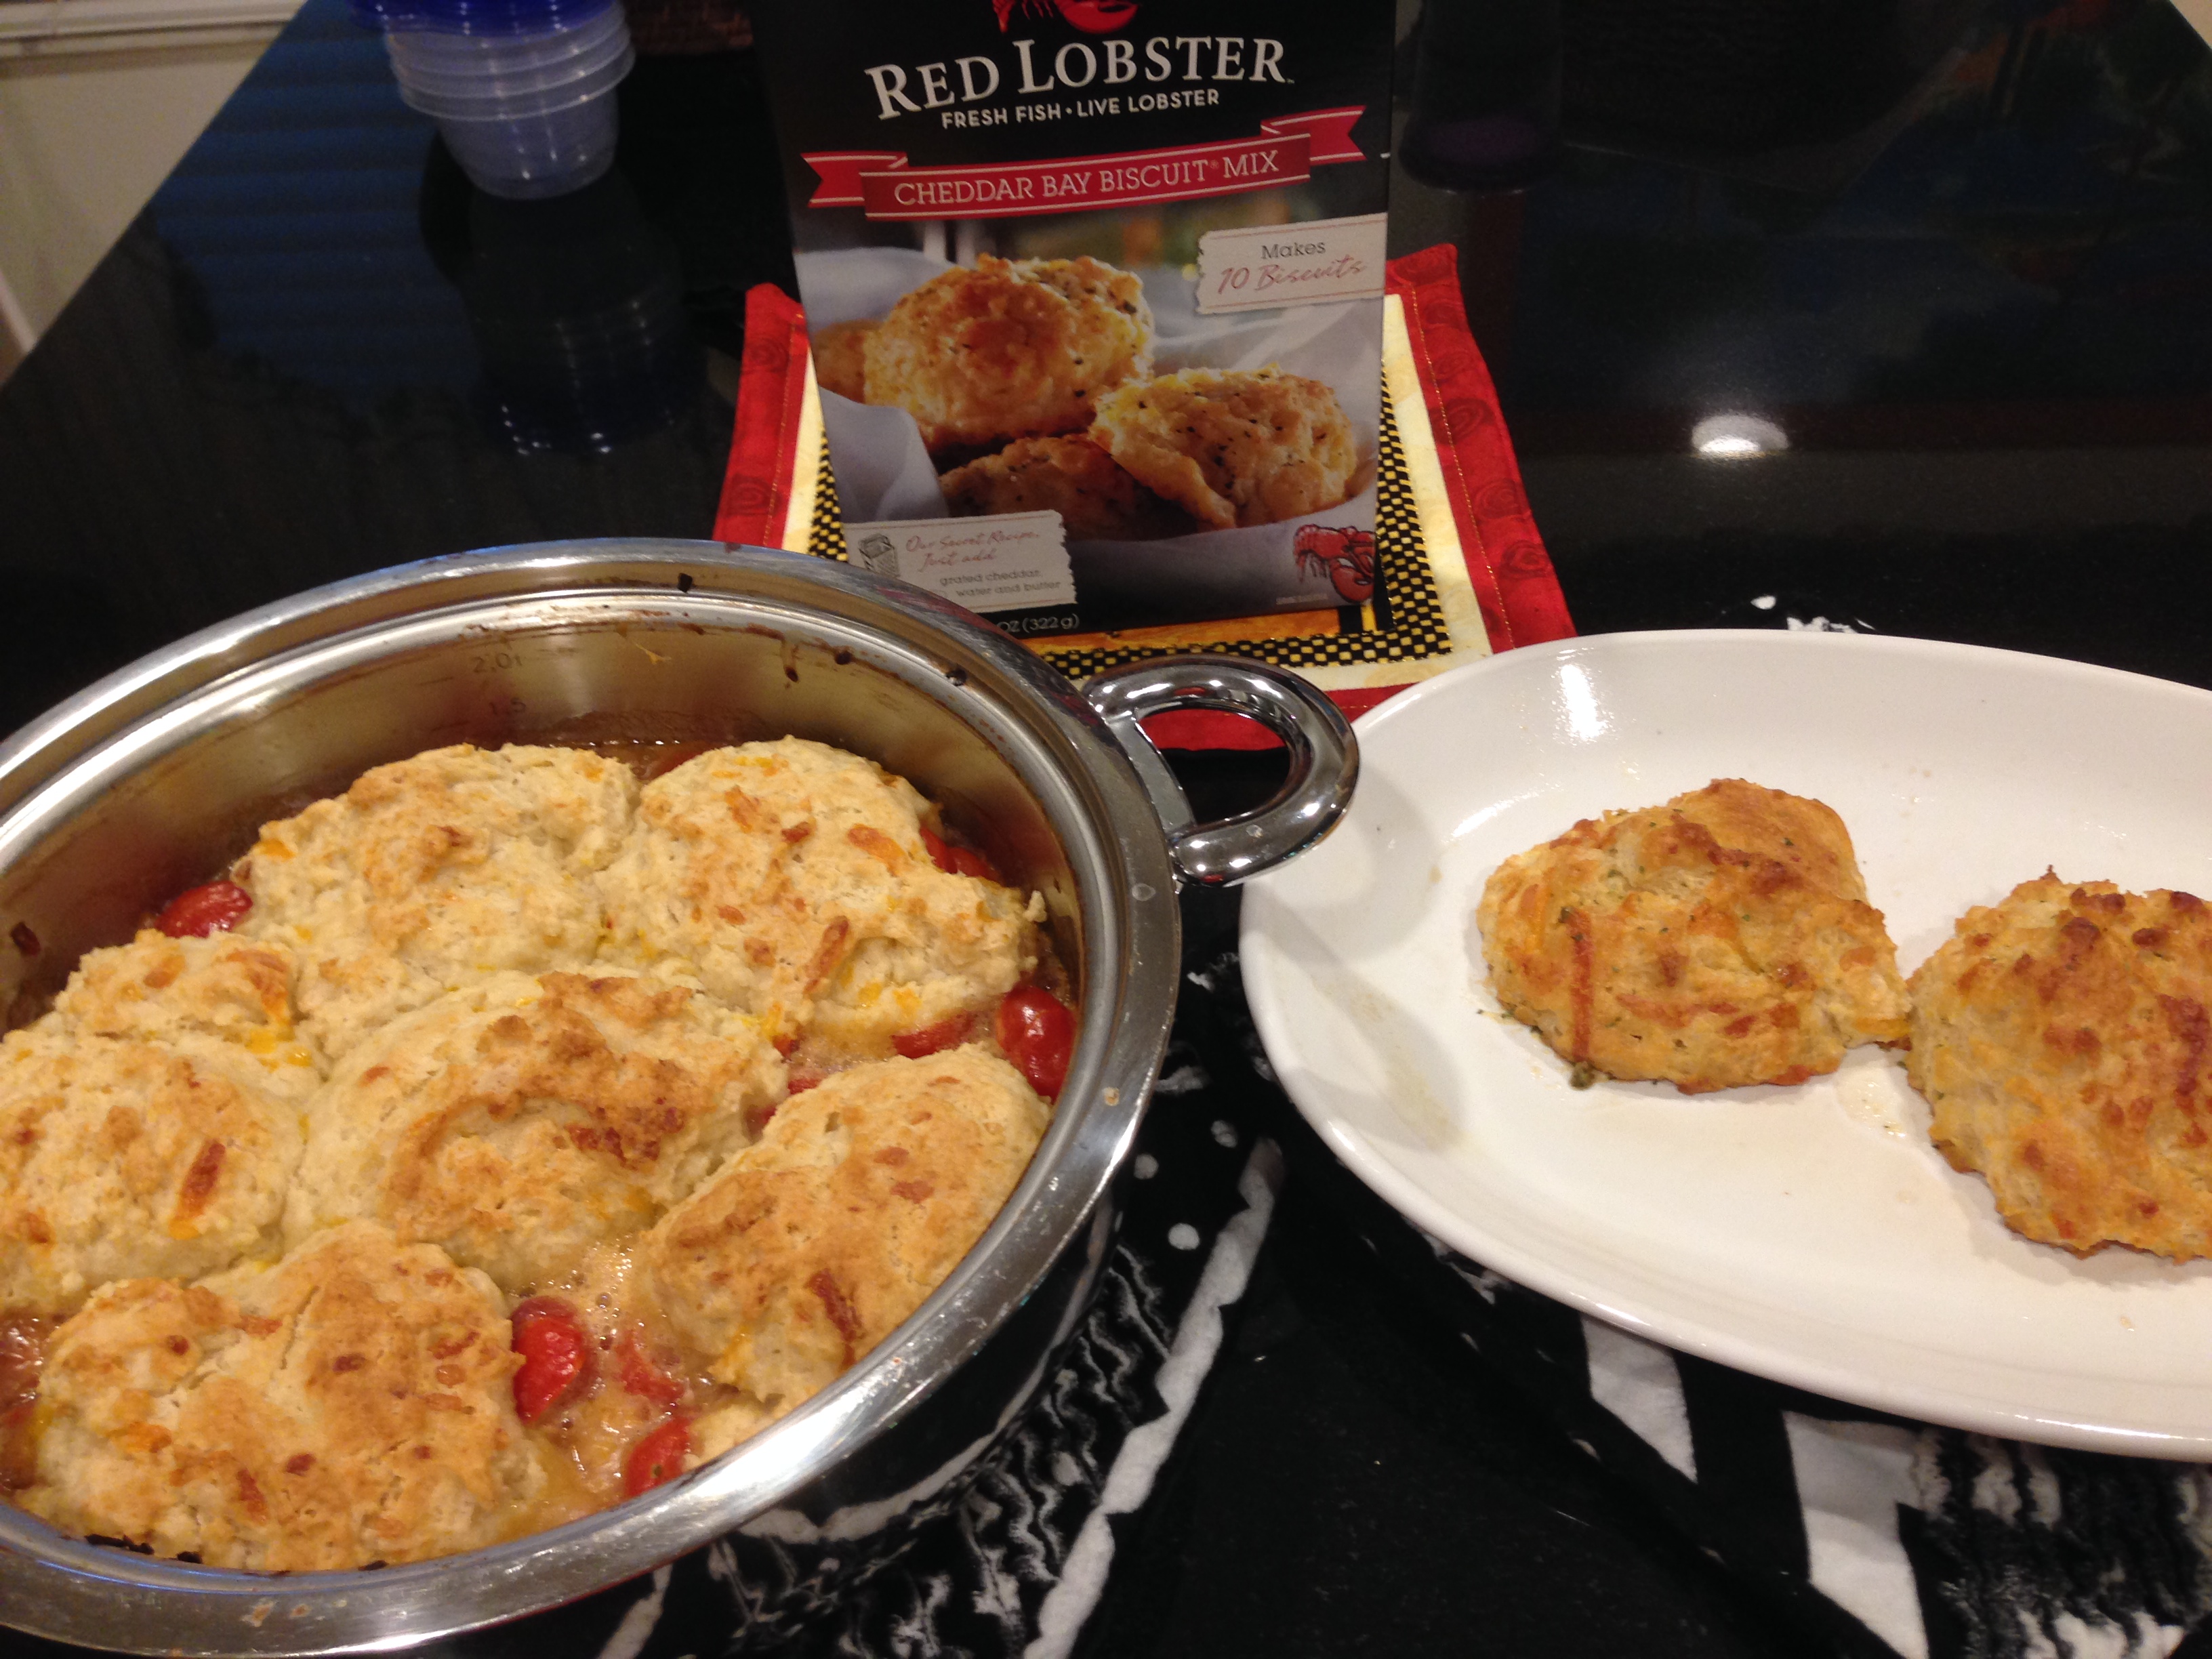 Tomato Cobbler with Red Lobster Cheddar Biscuits